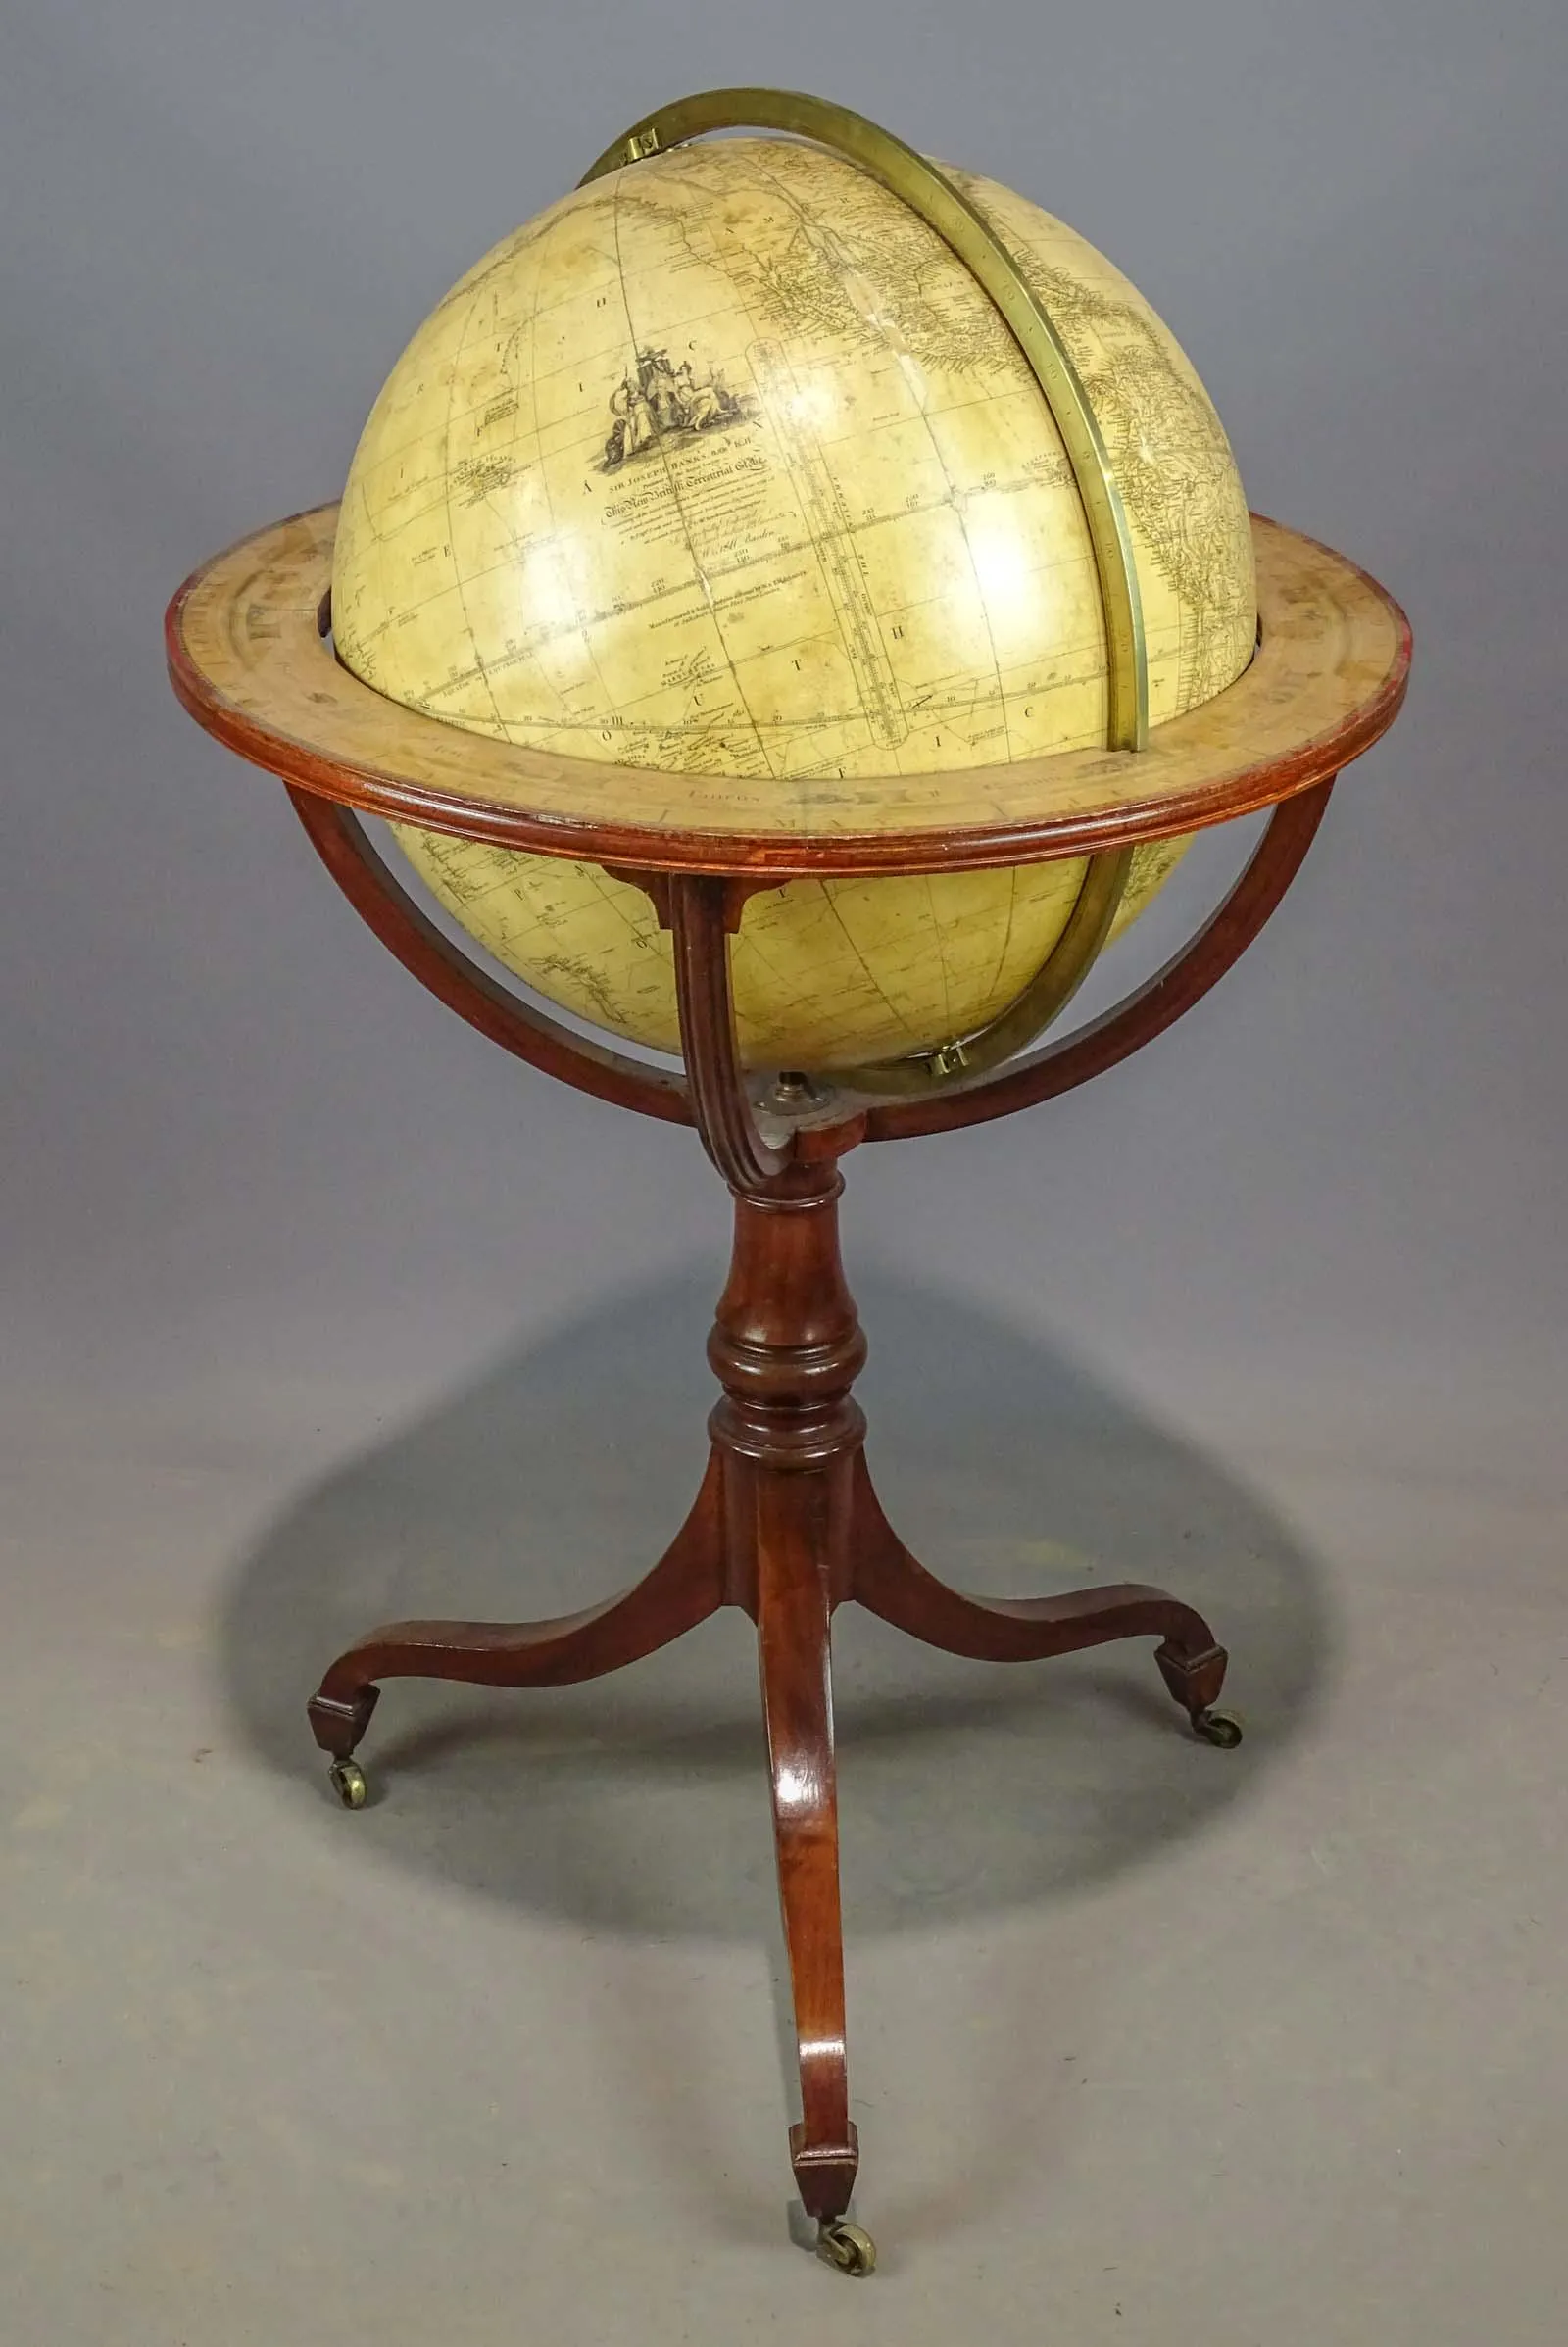 19th Century Floor Globe, estimated at $800-$1,200, sold for $12,000.